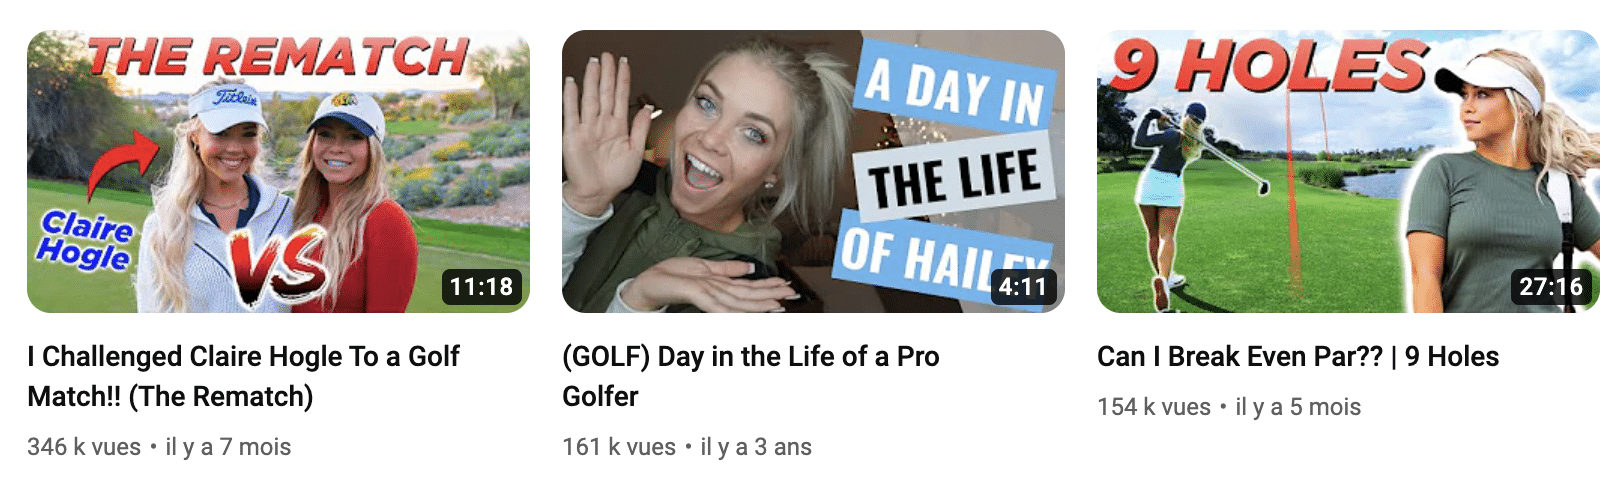 A youtube video showing a group of people playing golf.